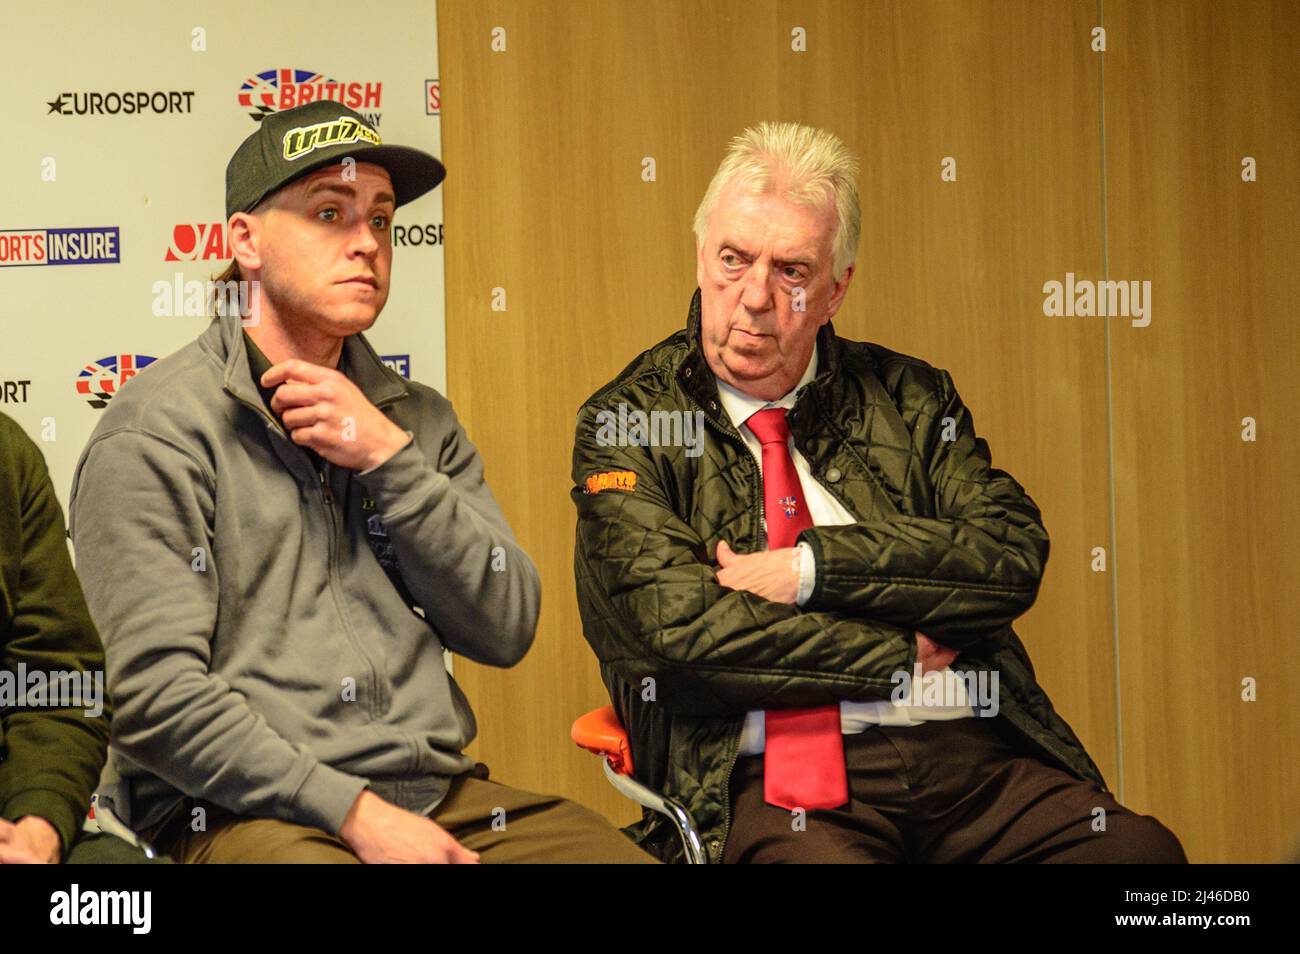 MANCHESTER, UK. APRIL 12TH: Richie Hawkins (left), Manager of Ipswich and Wolves' Manager Peter Adams at the Discovery Networks Eurosport Speedway Season Launch at the National Speedway Stadium, Manchester on Tuesday 12th April 2022 (Credit: Ian Charles | MI News) Credit: MI News & Sport /Alamy Live News Stock Photo